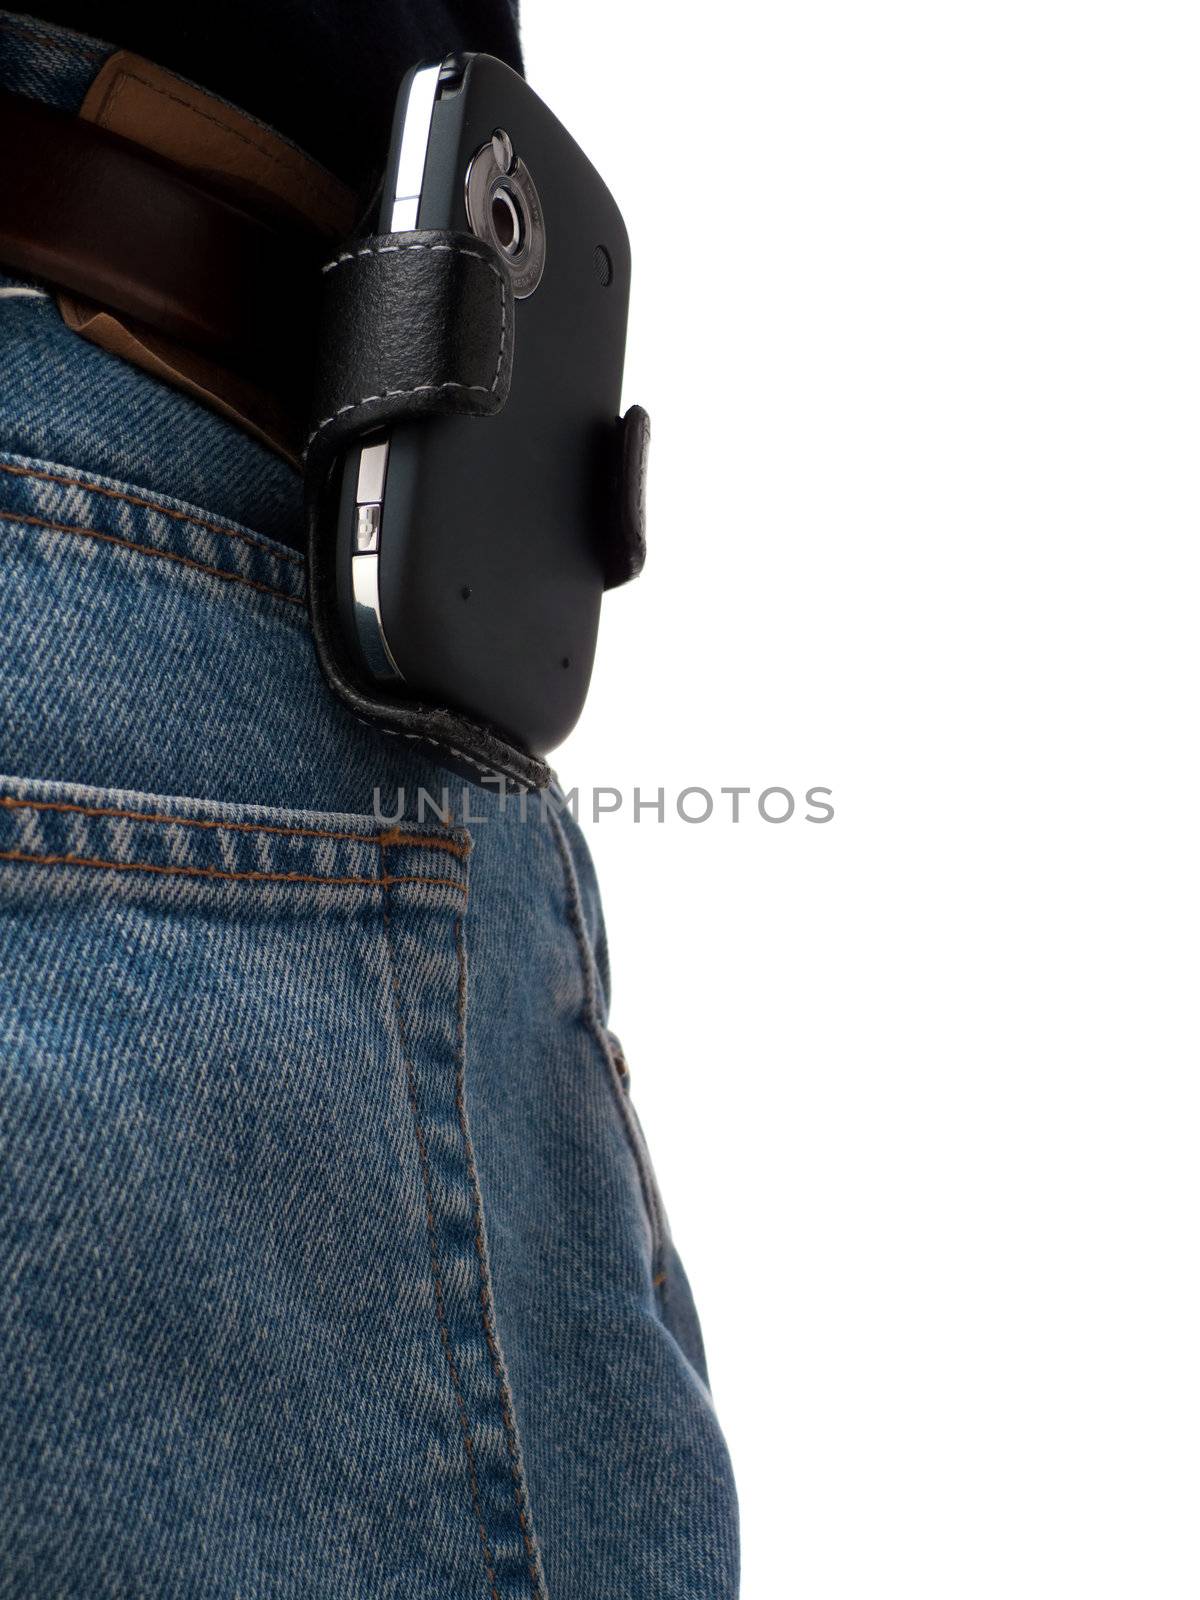 Jeans Back Pocket with PDA on hip by woodygraphs